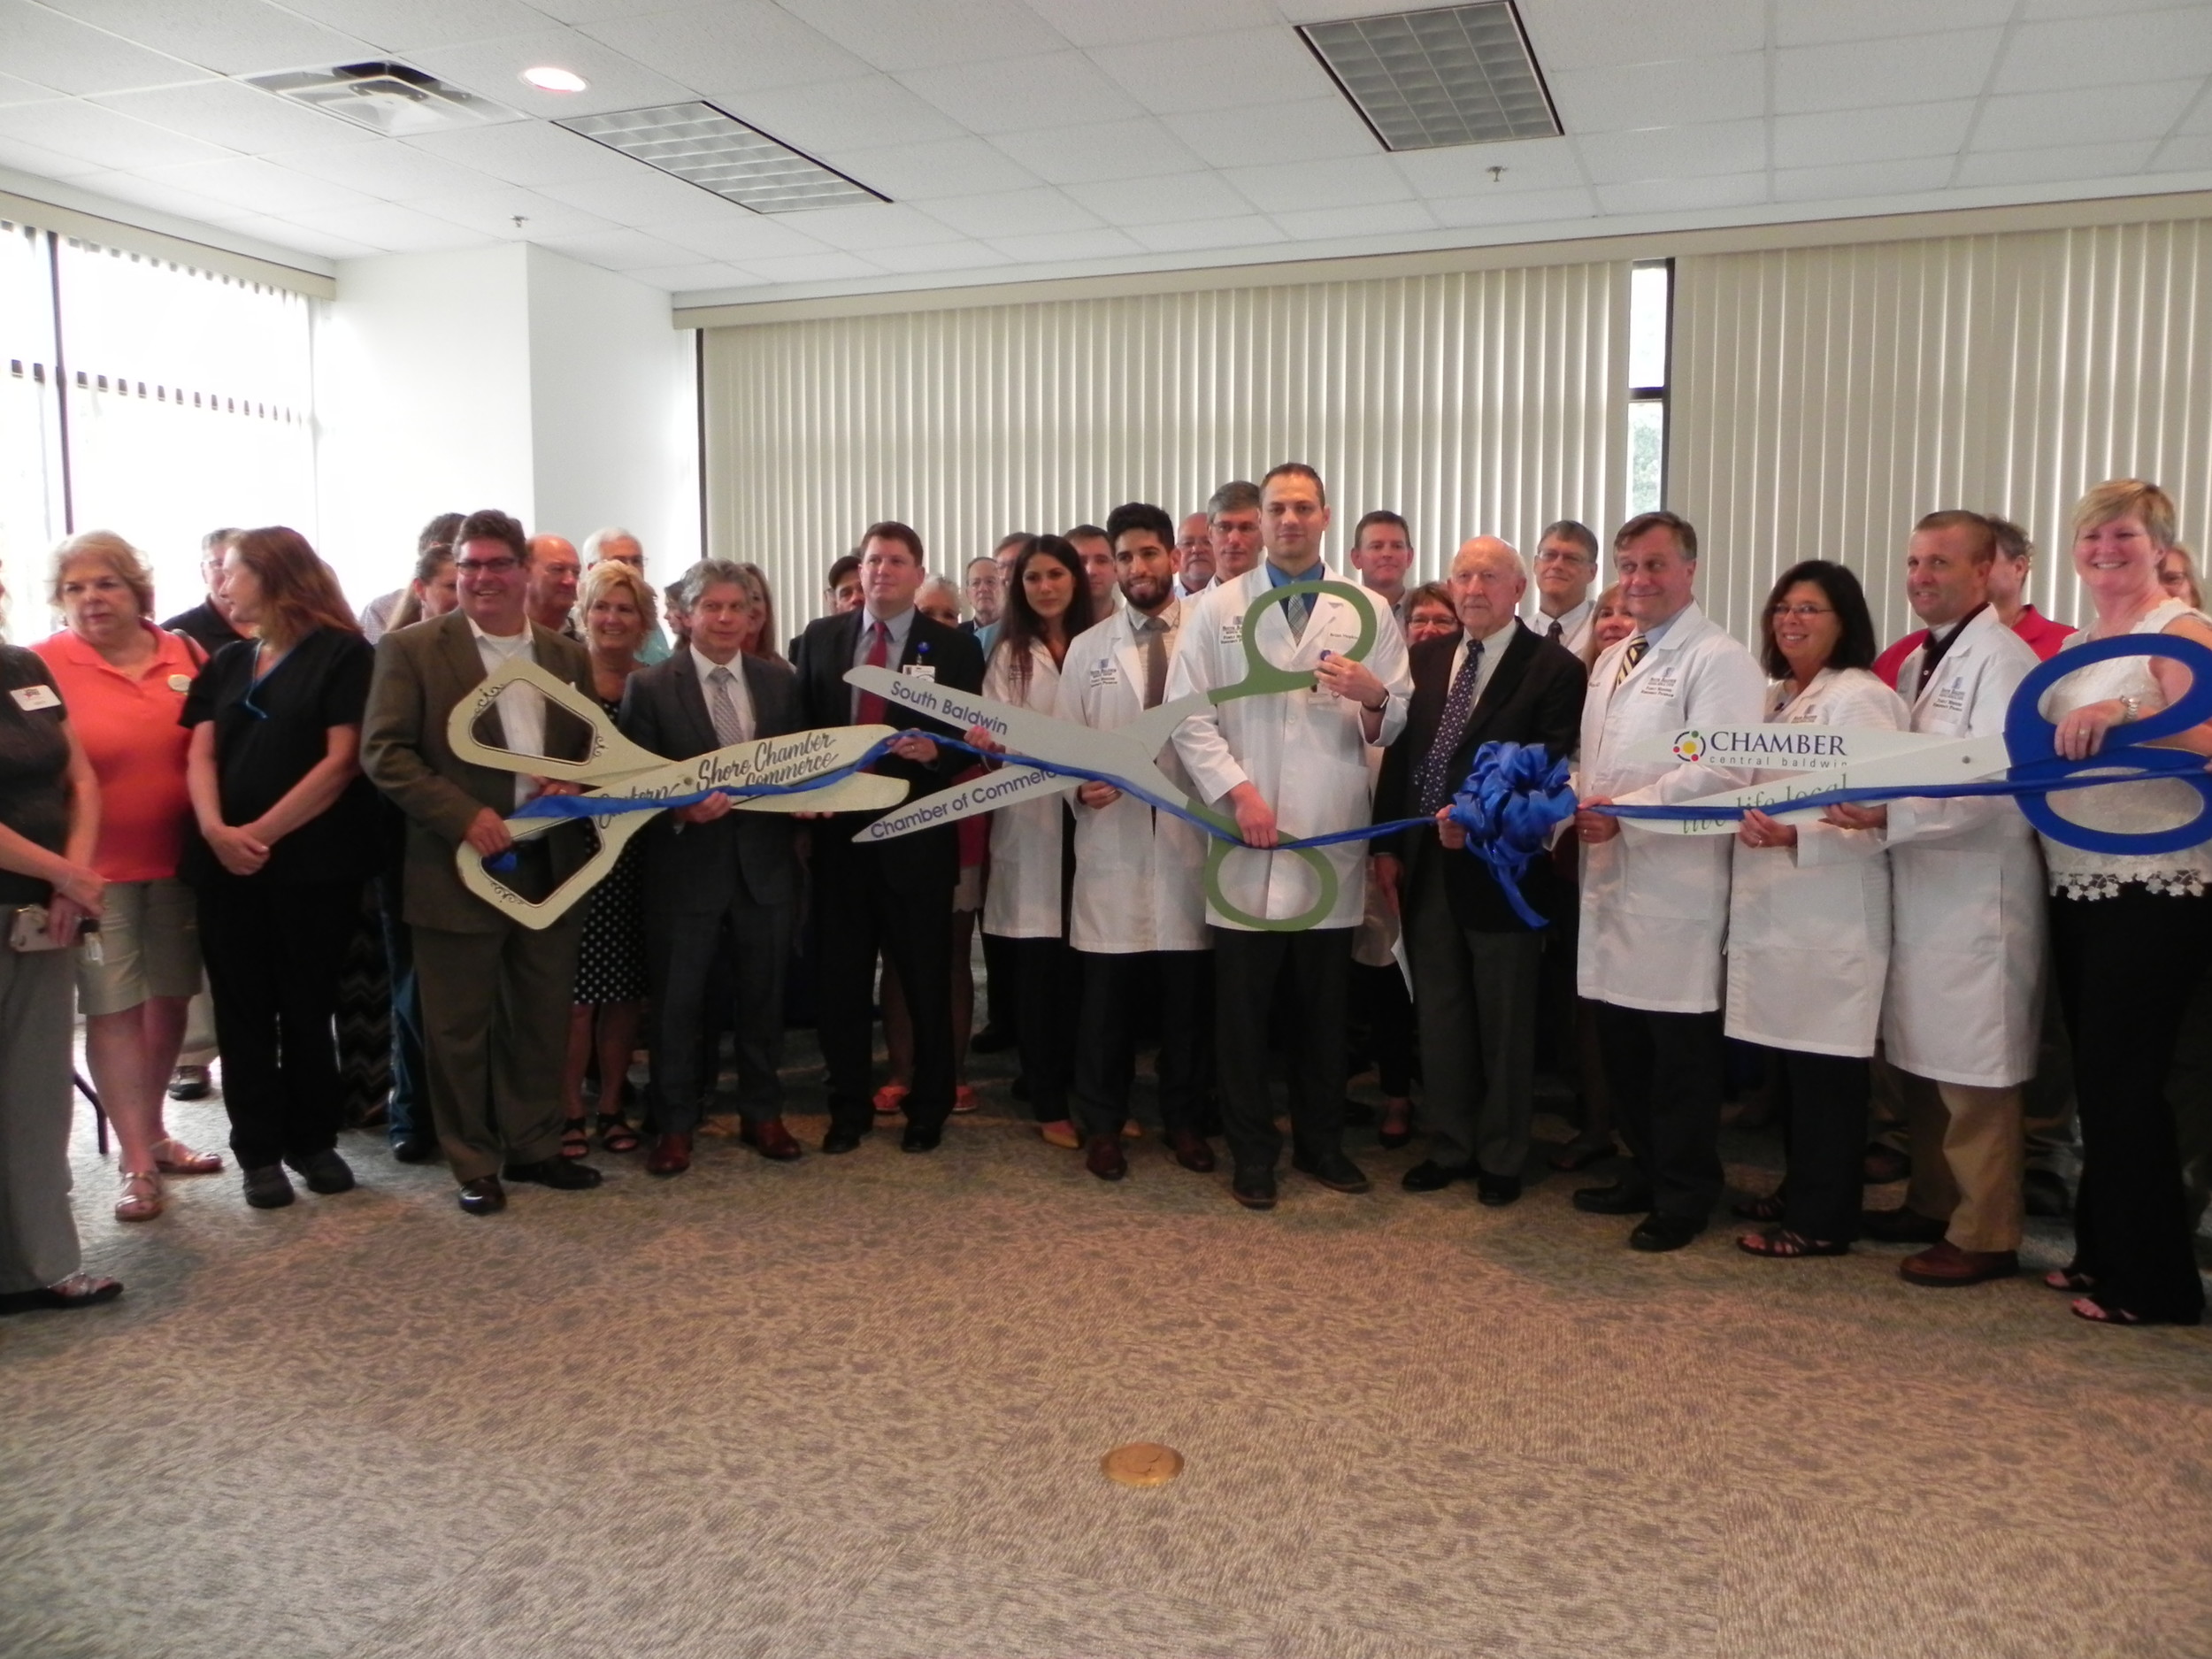 A large ribbon cutting was held on Aug. 21 for the new South Baldwin Medical Group Family Medicine Residency Practice.